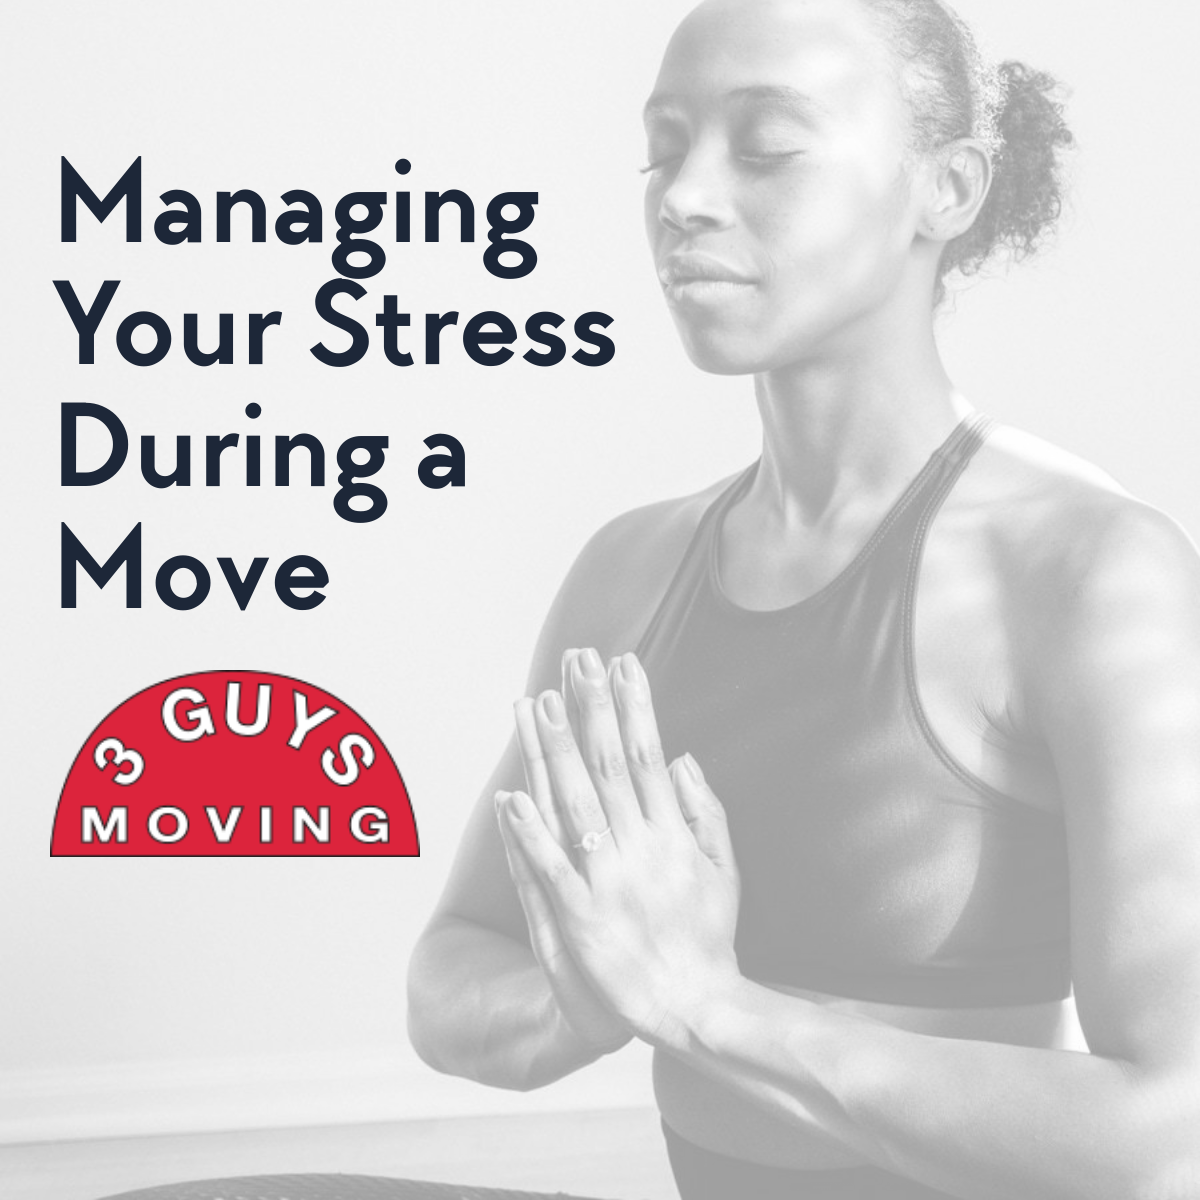 Managing Your Stress During a Move - Managing Your Stress During a Move